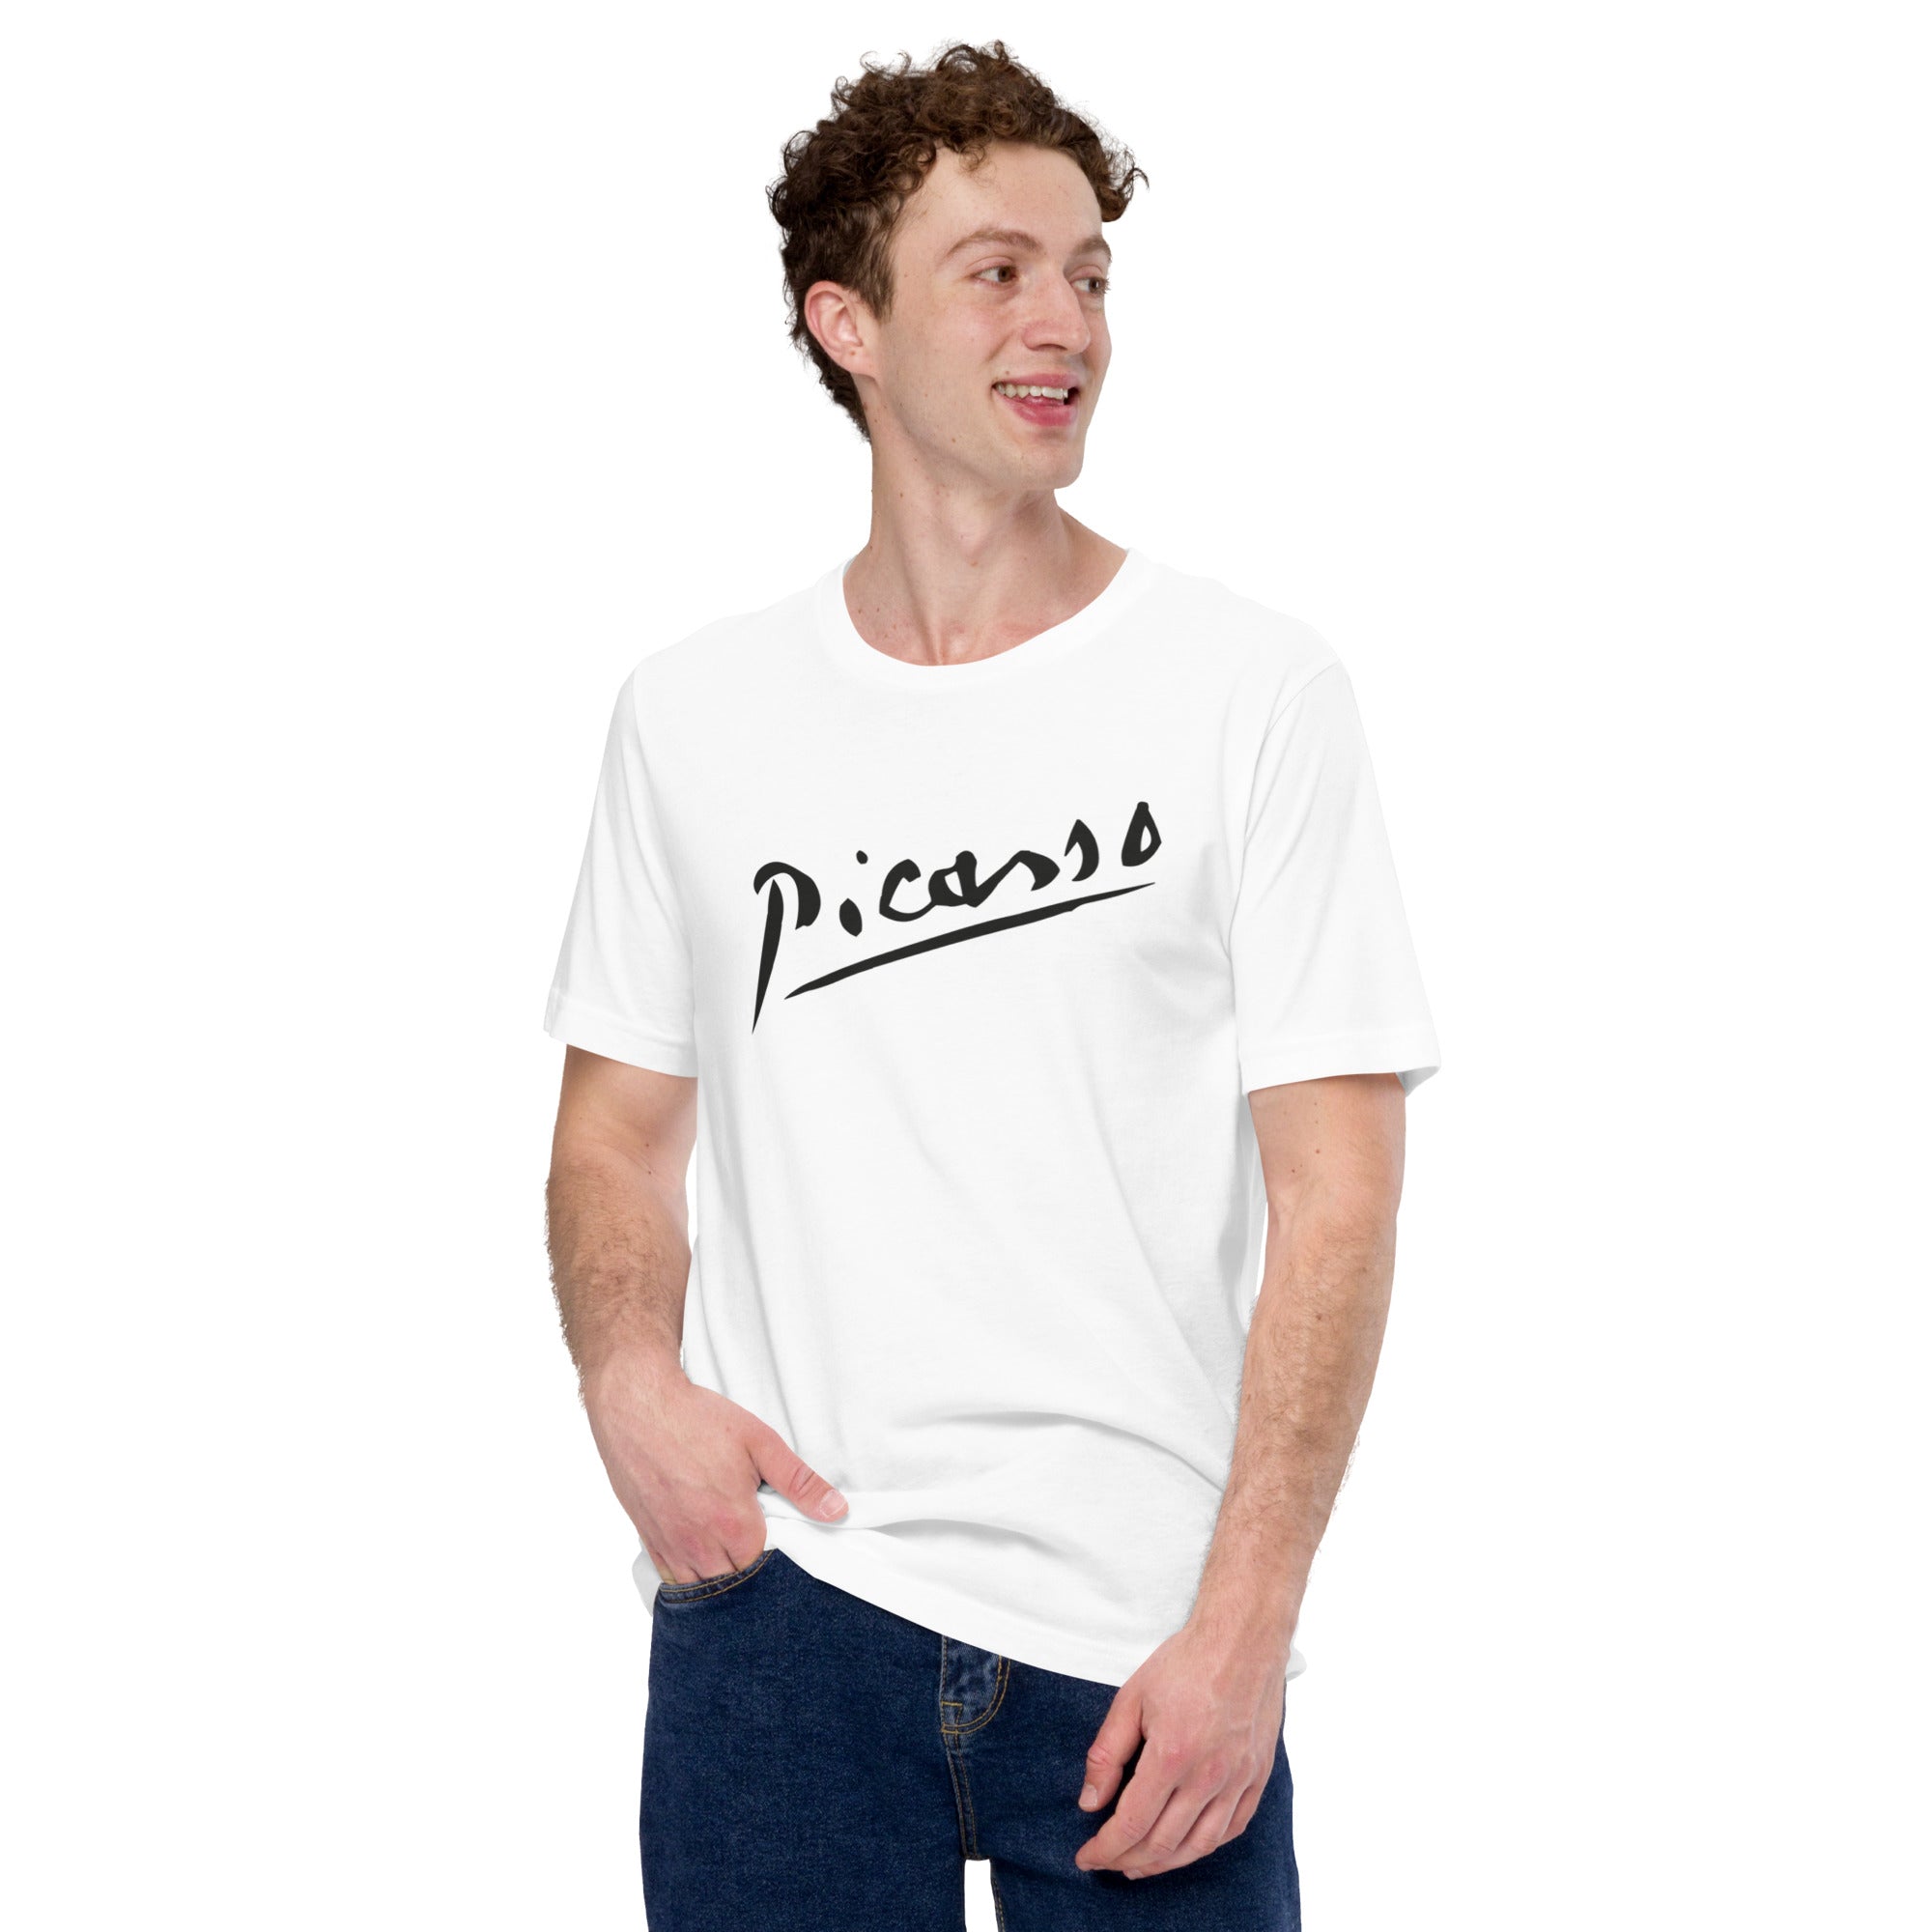 Picasso t shirt for man and women